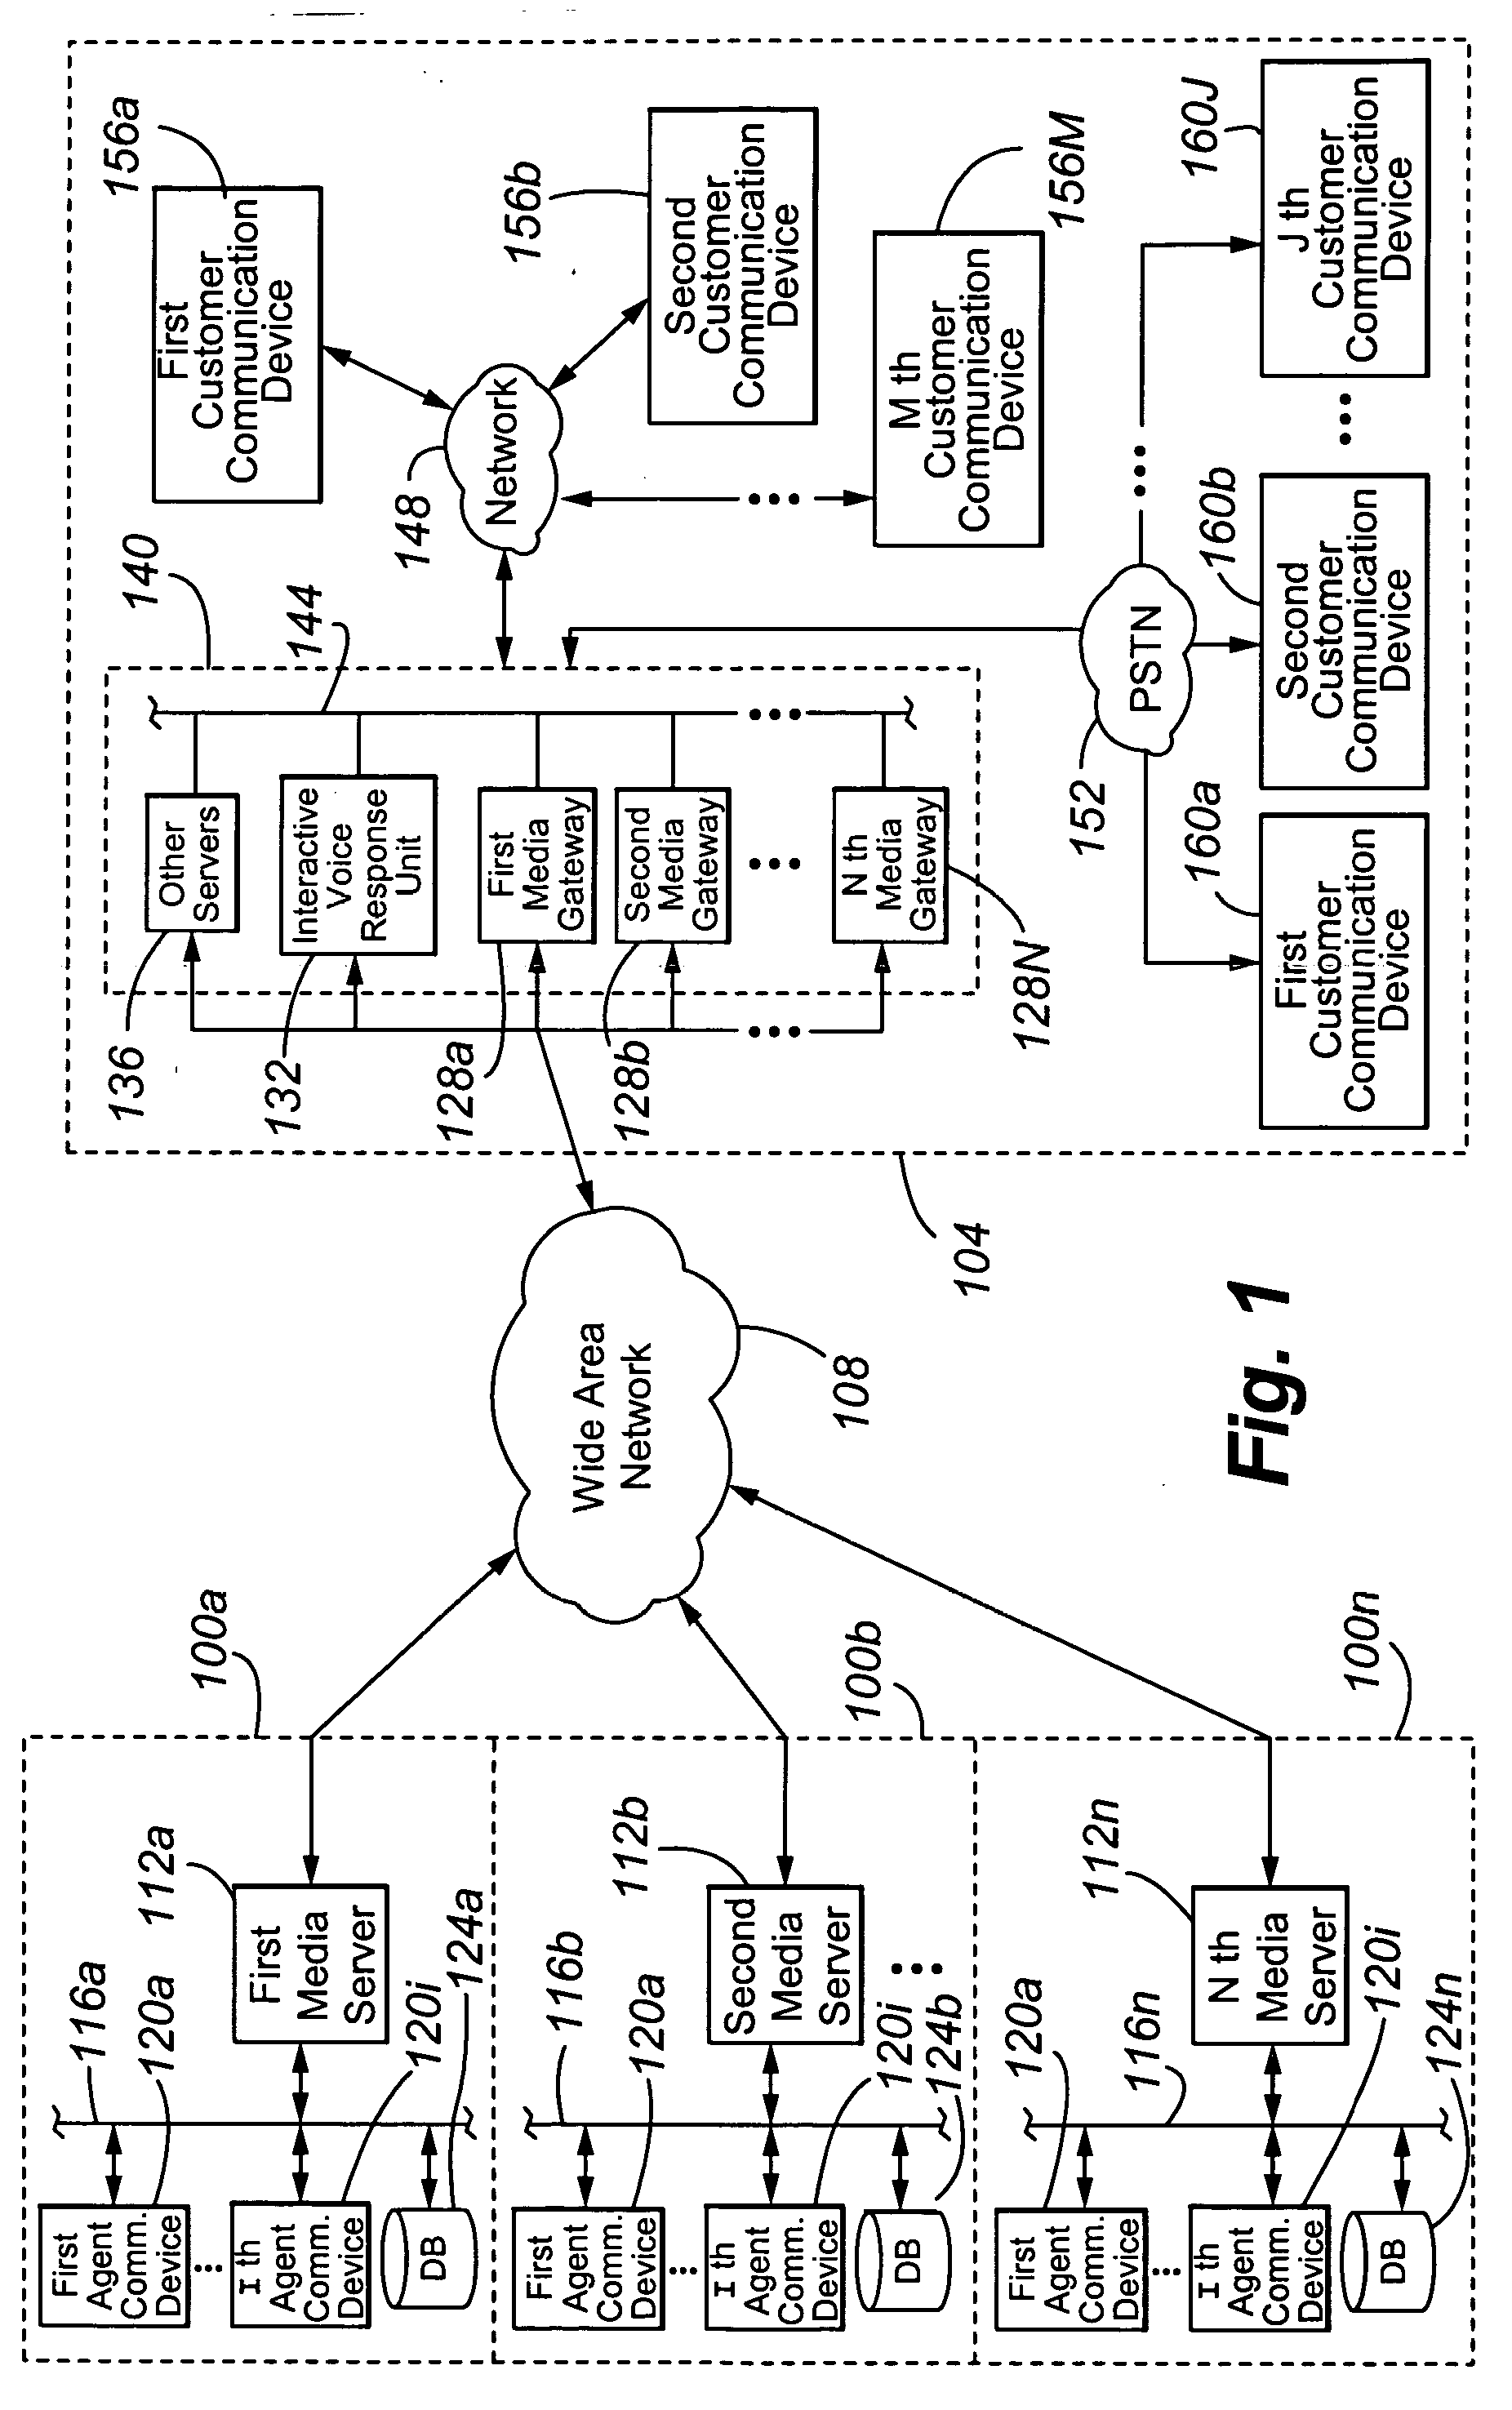 Method and apparatus for global call queue in a global call center